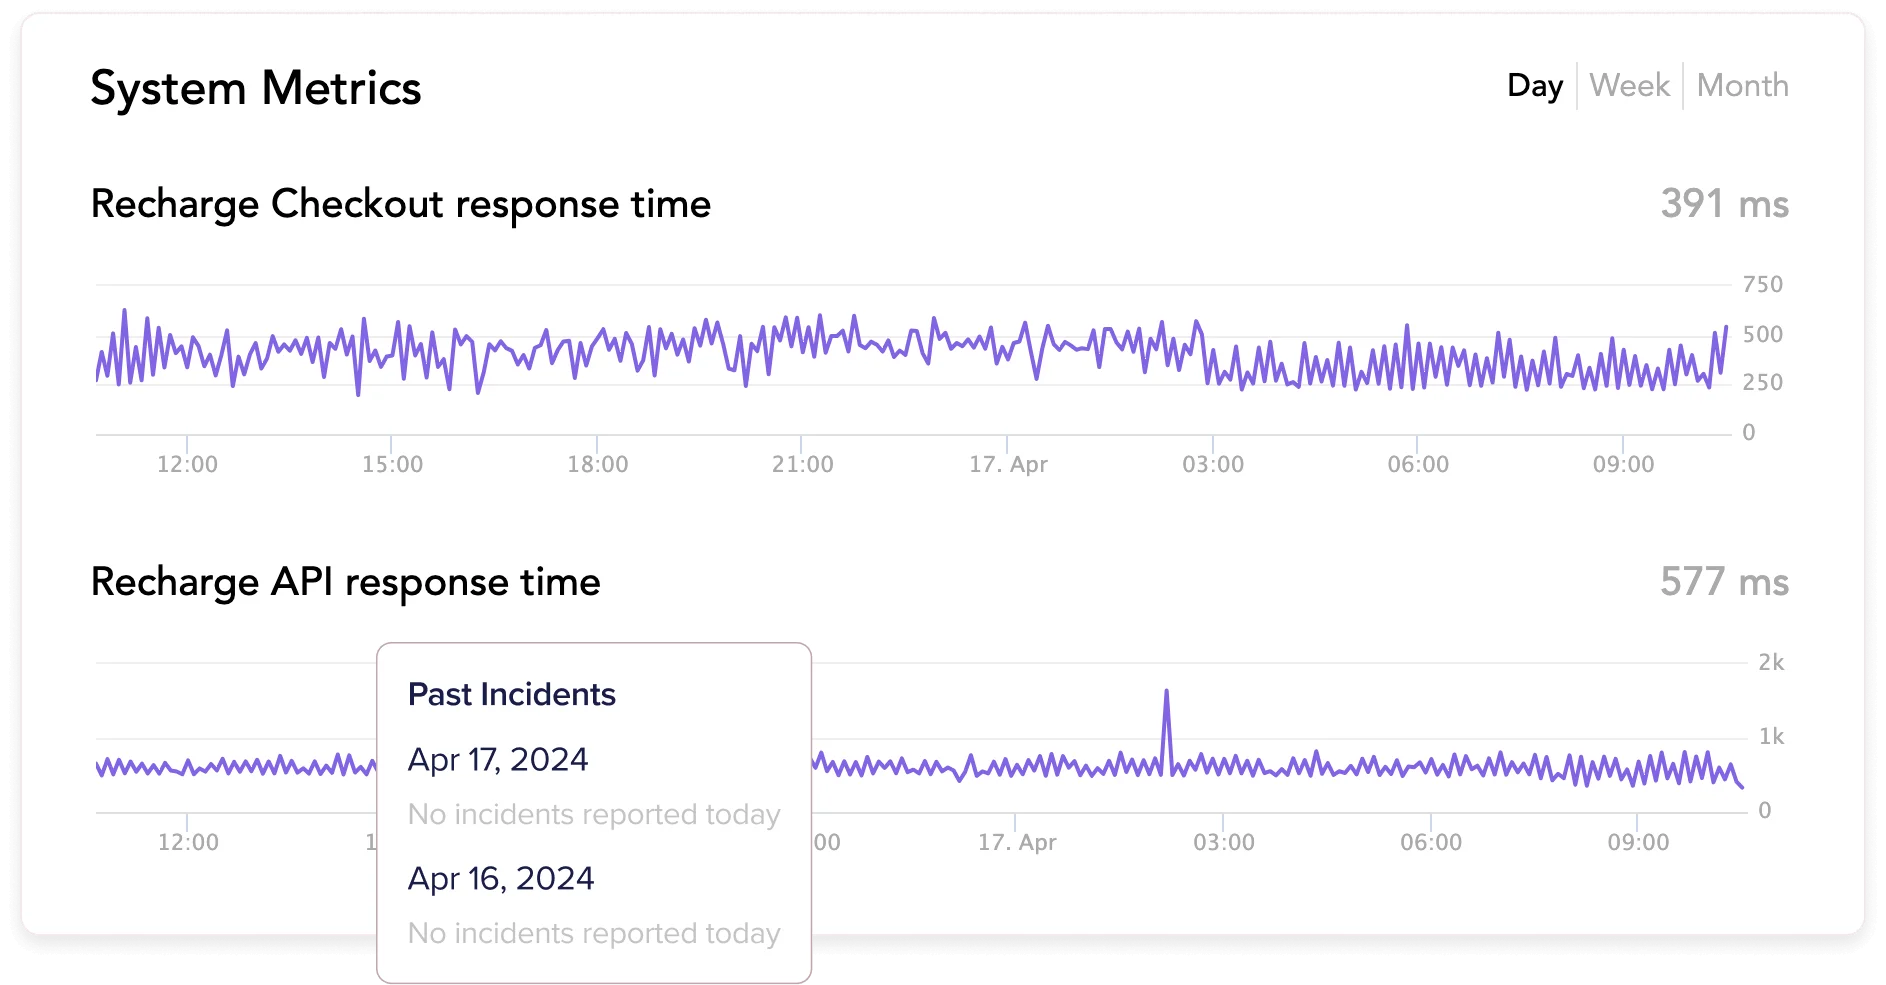 Chart showing system metrics and response time